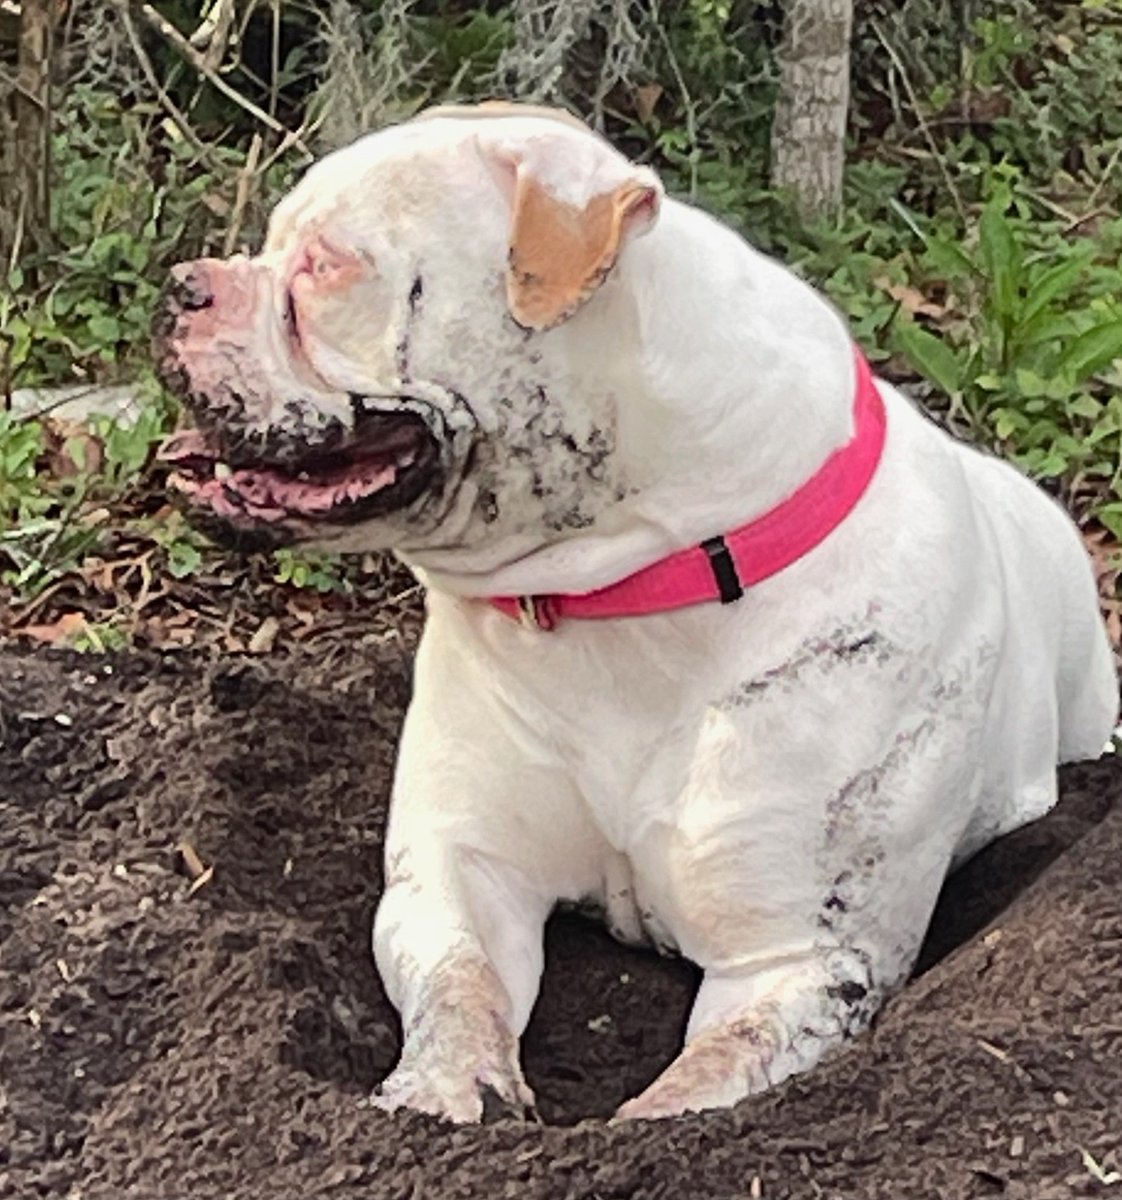 Sometimes ya just gotta go for a swim n dig a nice hole to grin at peeps from - GG living her best life 

#AmericanBulldogs